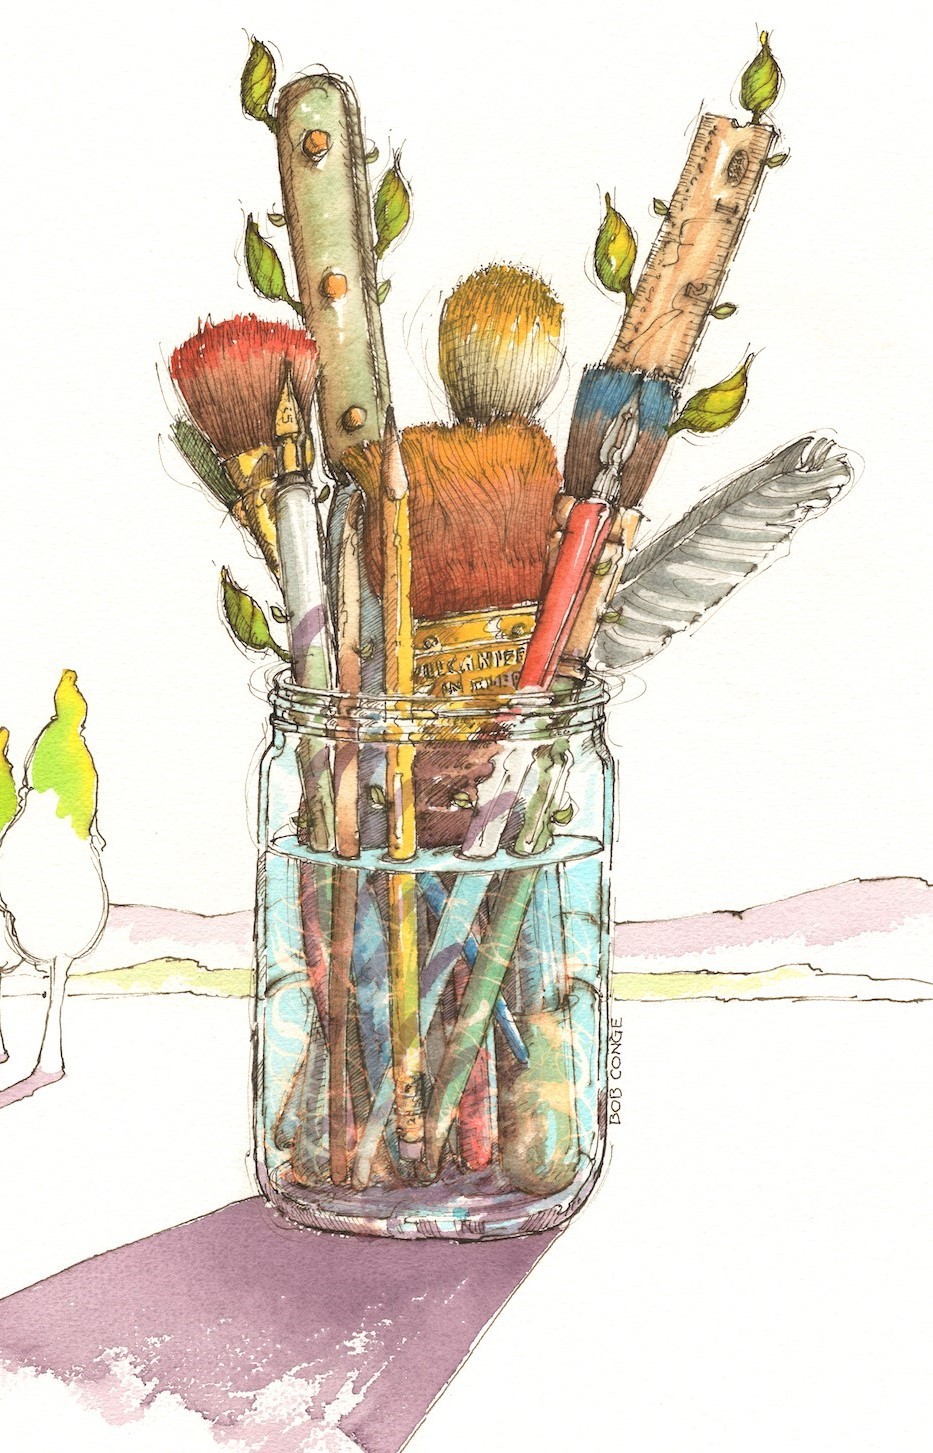 Handrawn pen and ink illustration of artist's paint brushes in a glass canning jar